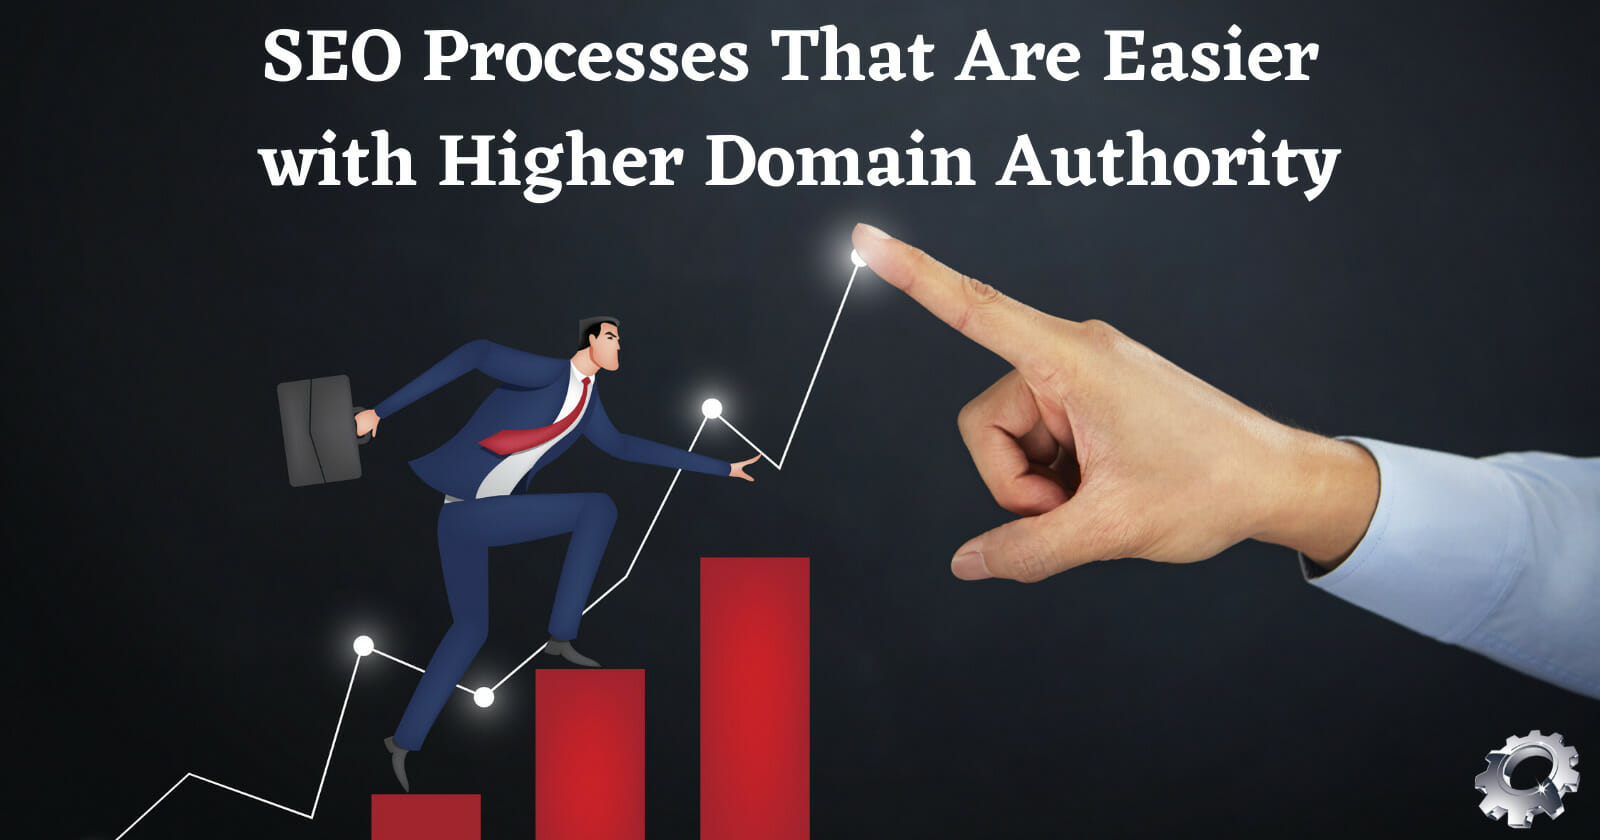 SEO Processes That Are Easier with Higher Domain Authority